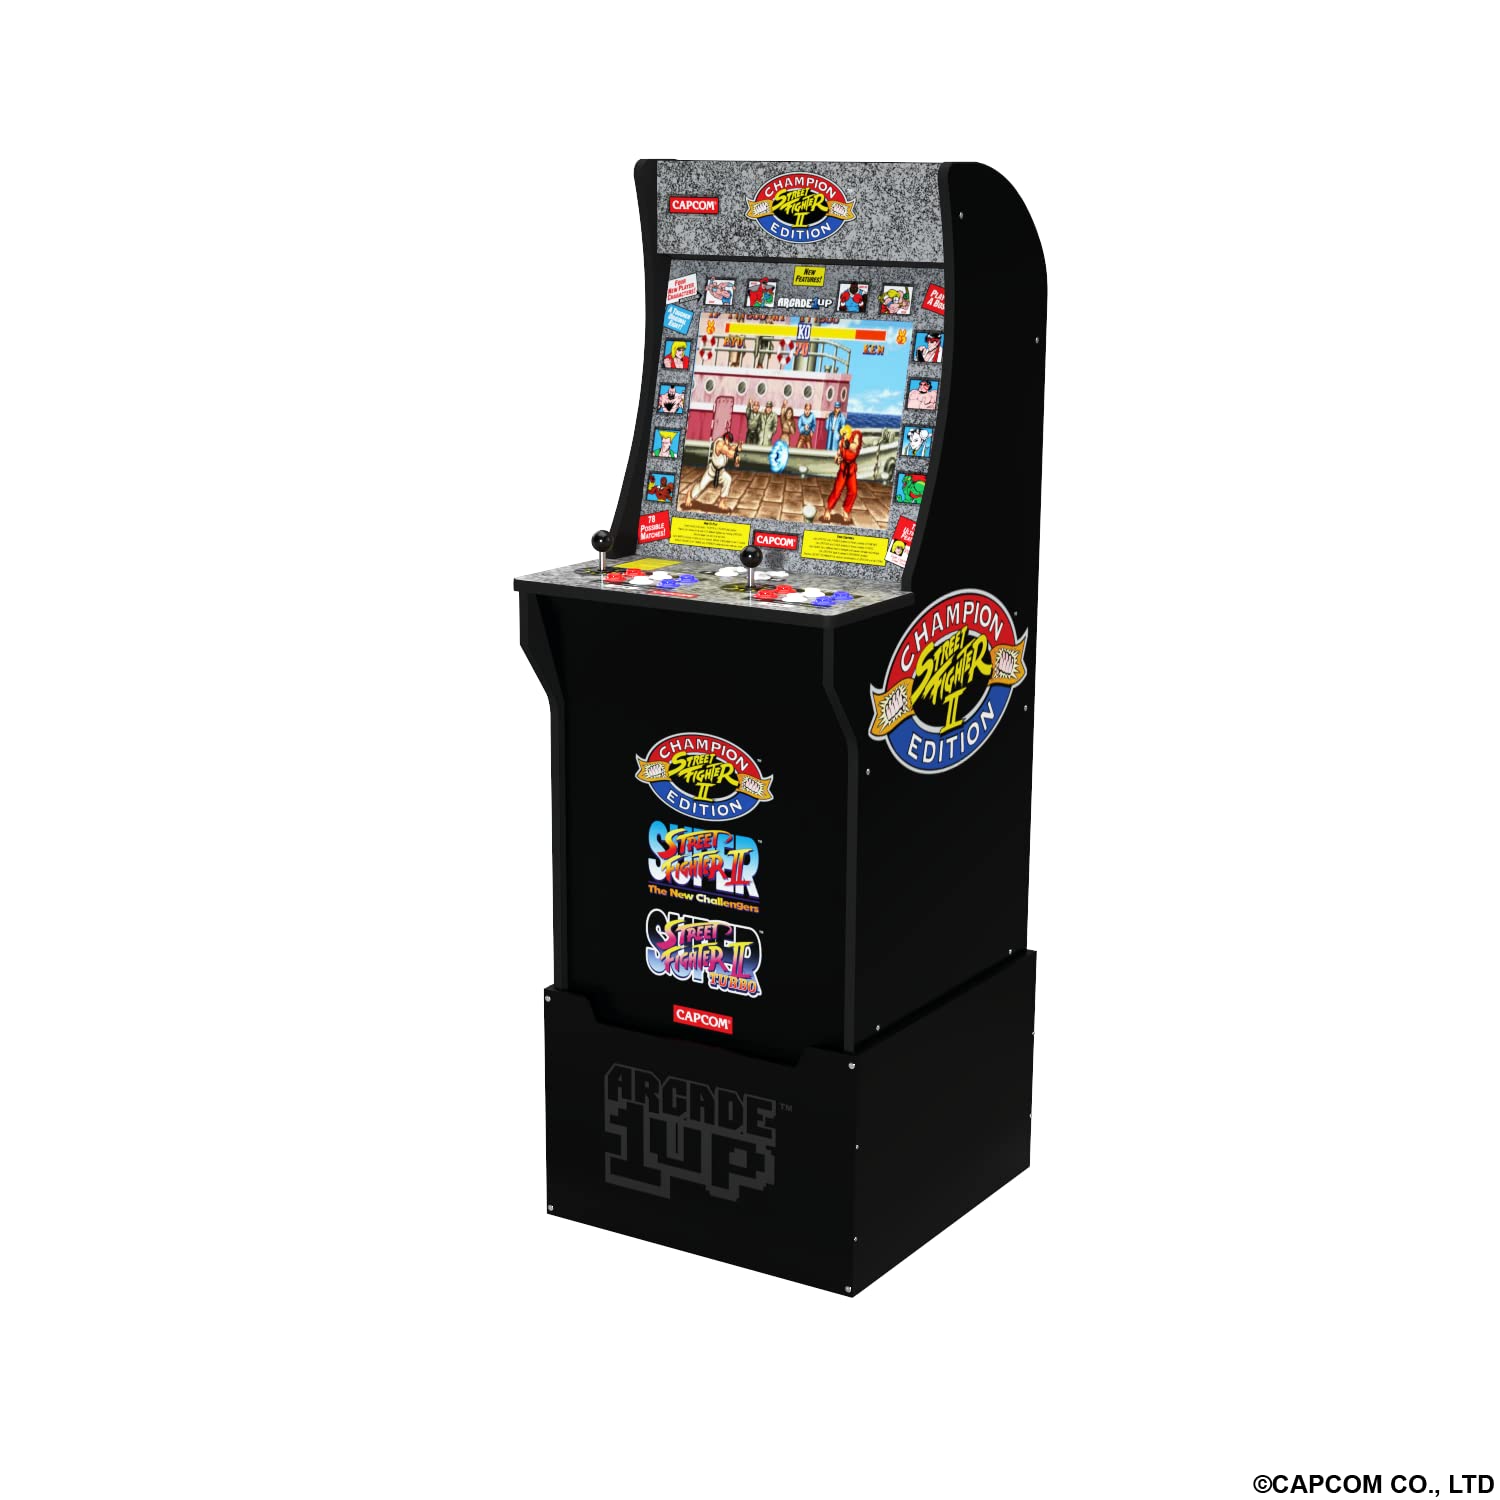 ARCADE1UP Street Fighter 2 - Classic 3-in-1 Home Arcade Cabinet with Licensed Riser